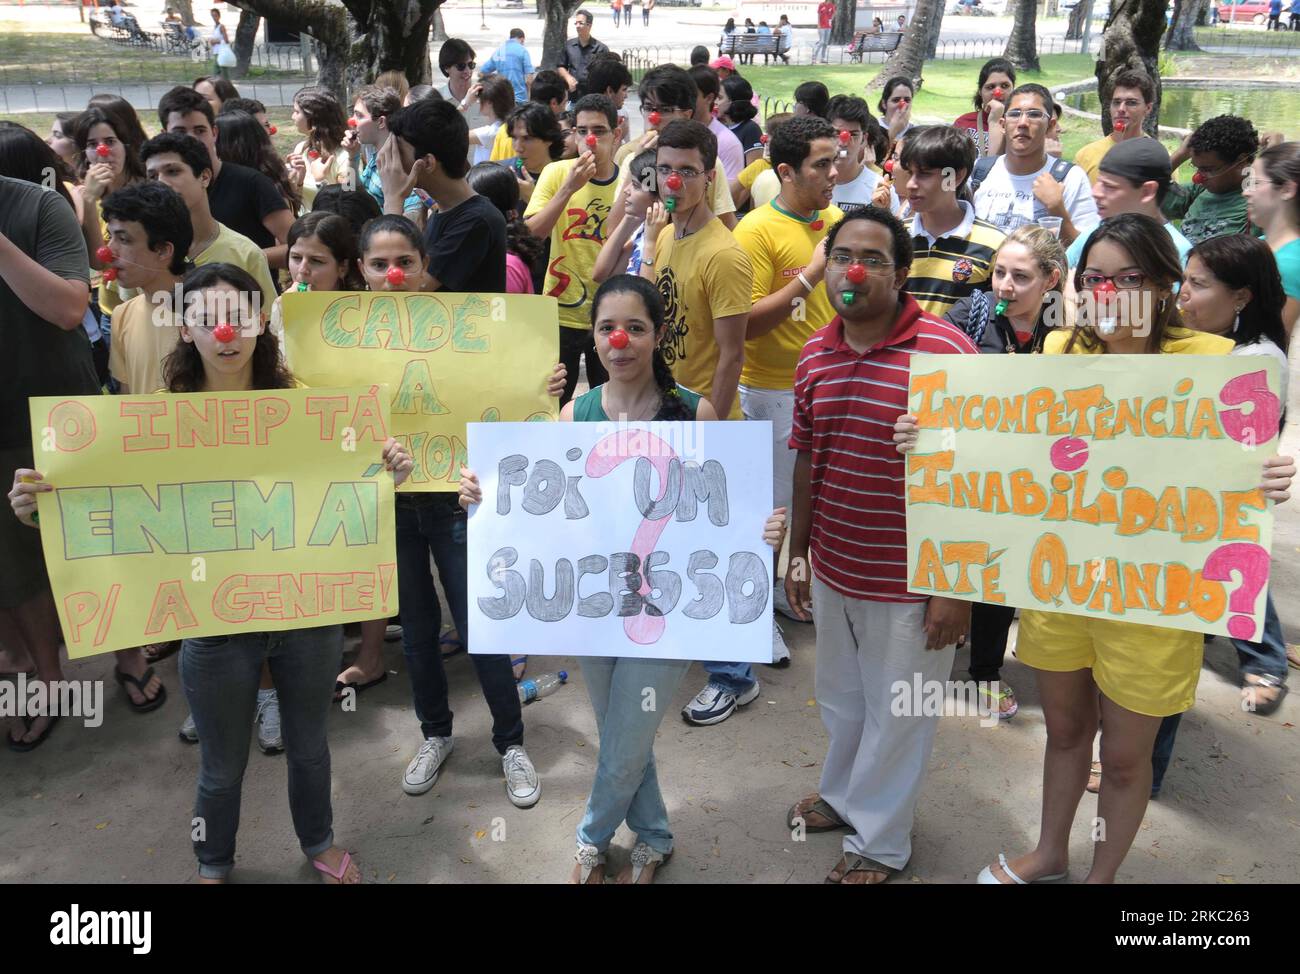 Bildnummer: 54645928  Datum: 16.11.2010  Copyright: imago/Xinhua (101117) -- Sao Paulo, Nov. 17, 2010 (Xinhua) -- Students wearing clown s noses and holding posters participate in a protest in Sao Paulo of Brazil, on Nov. 16, 2010. About o1,000 students protested against the latest round of High School National exams (ENEM) after exam results were annulled because of printing errors on the exam papers. (Xinhua/Agencia Estado) (BRAZIL OUT) (wh) BRAZIL-EDUCATION-PROTEST PUBLICATIONxNOTxINxCHN Gesellschaft Politik Studenten Studentendemo Demo Protest Bildung Uni kbdig xub 2010 quer     Bildnummer Stock Photo